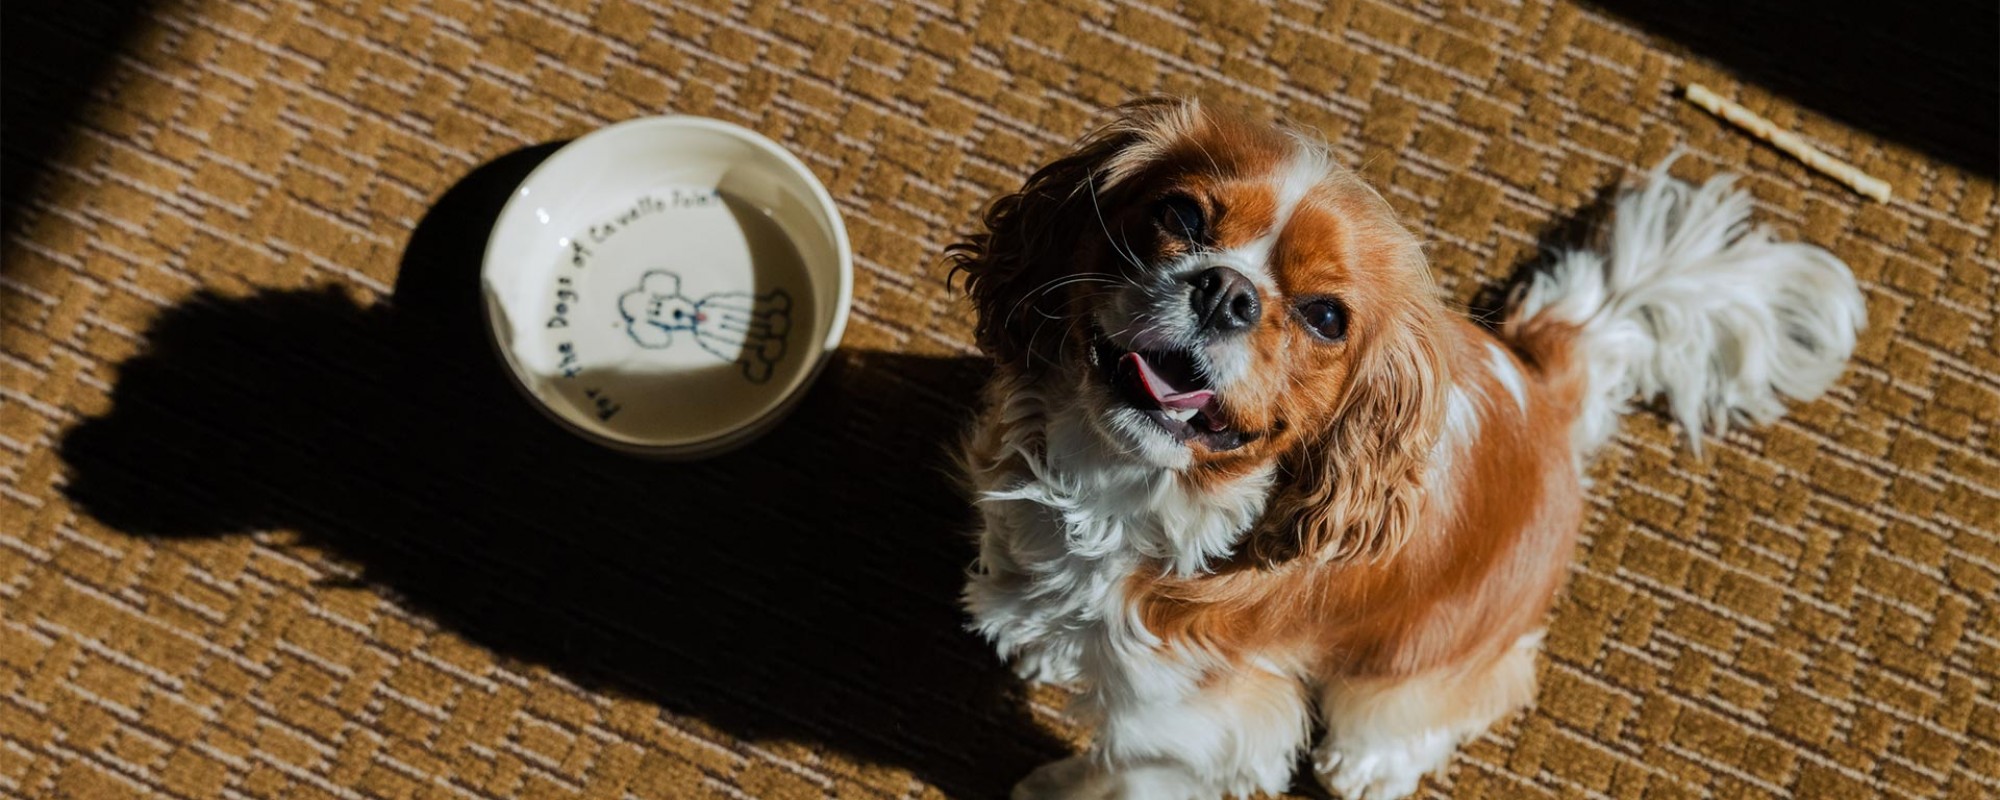 dog with bowl